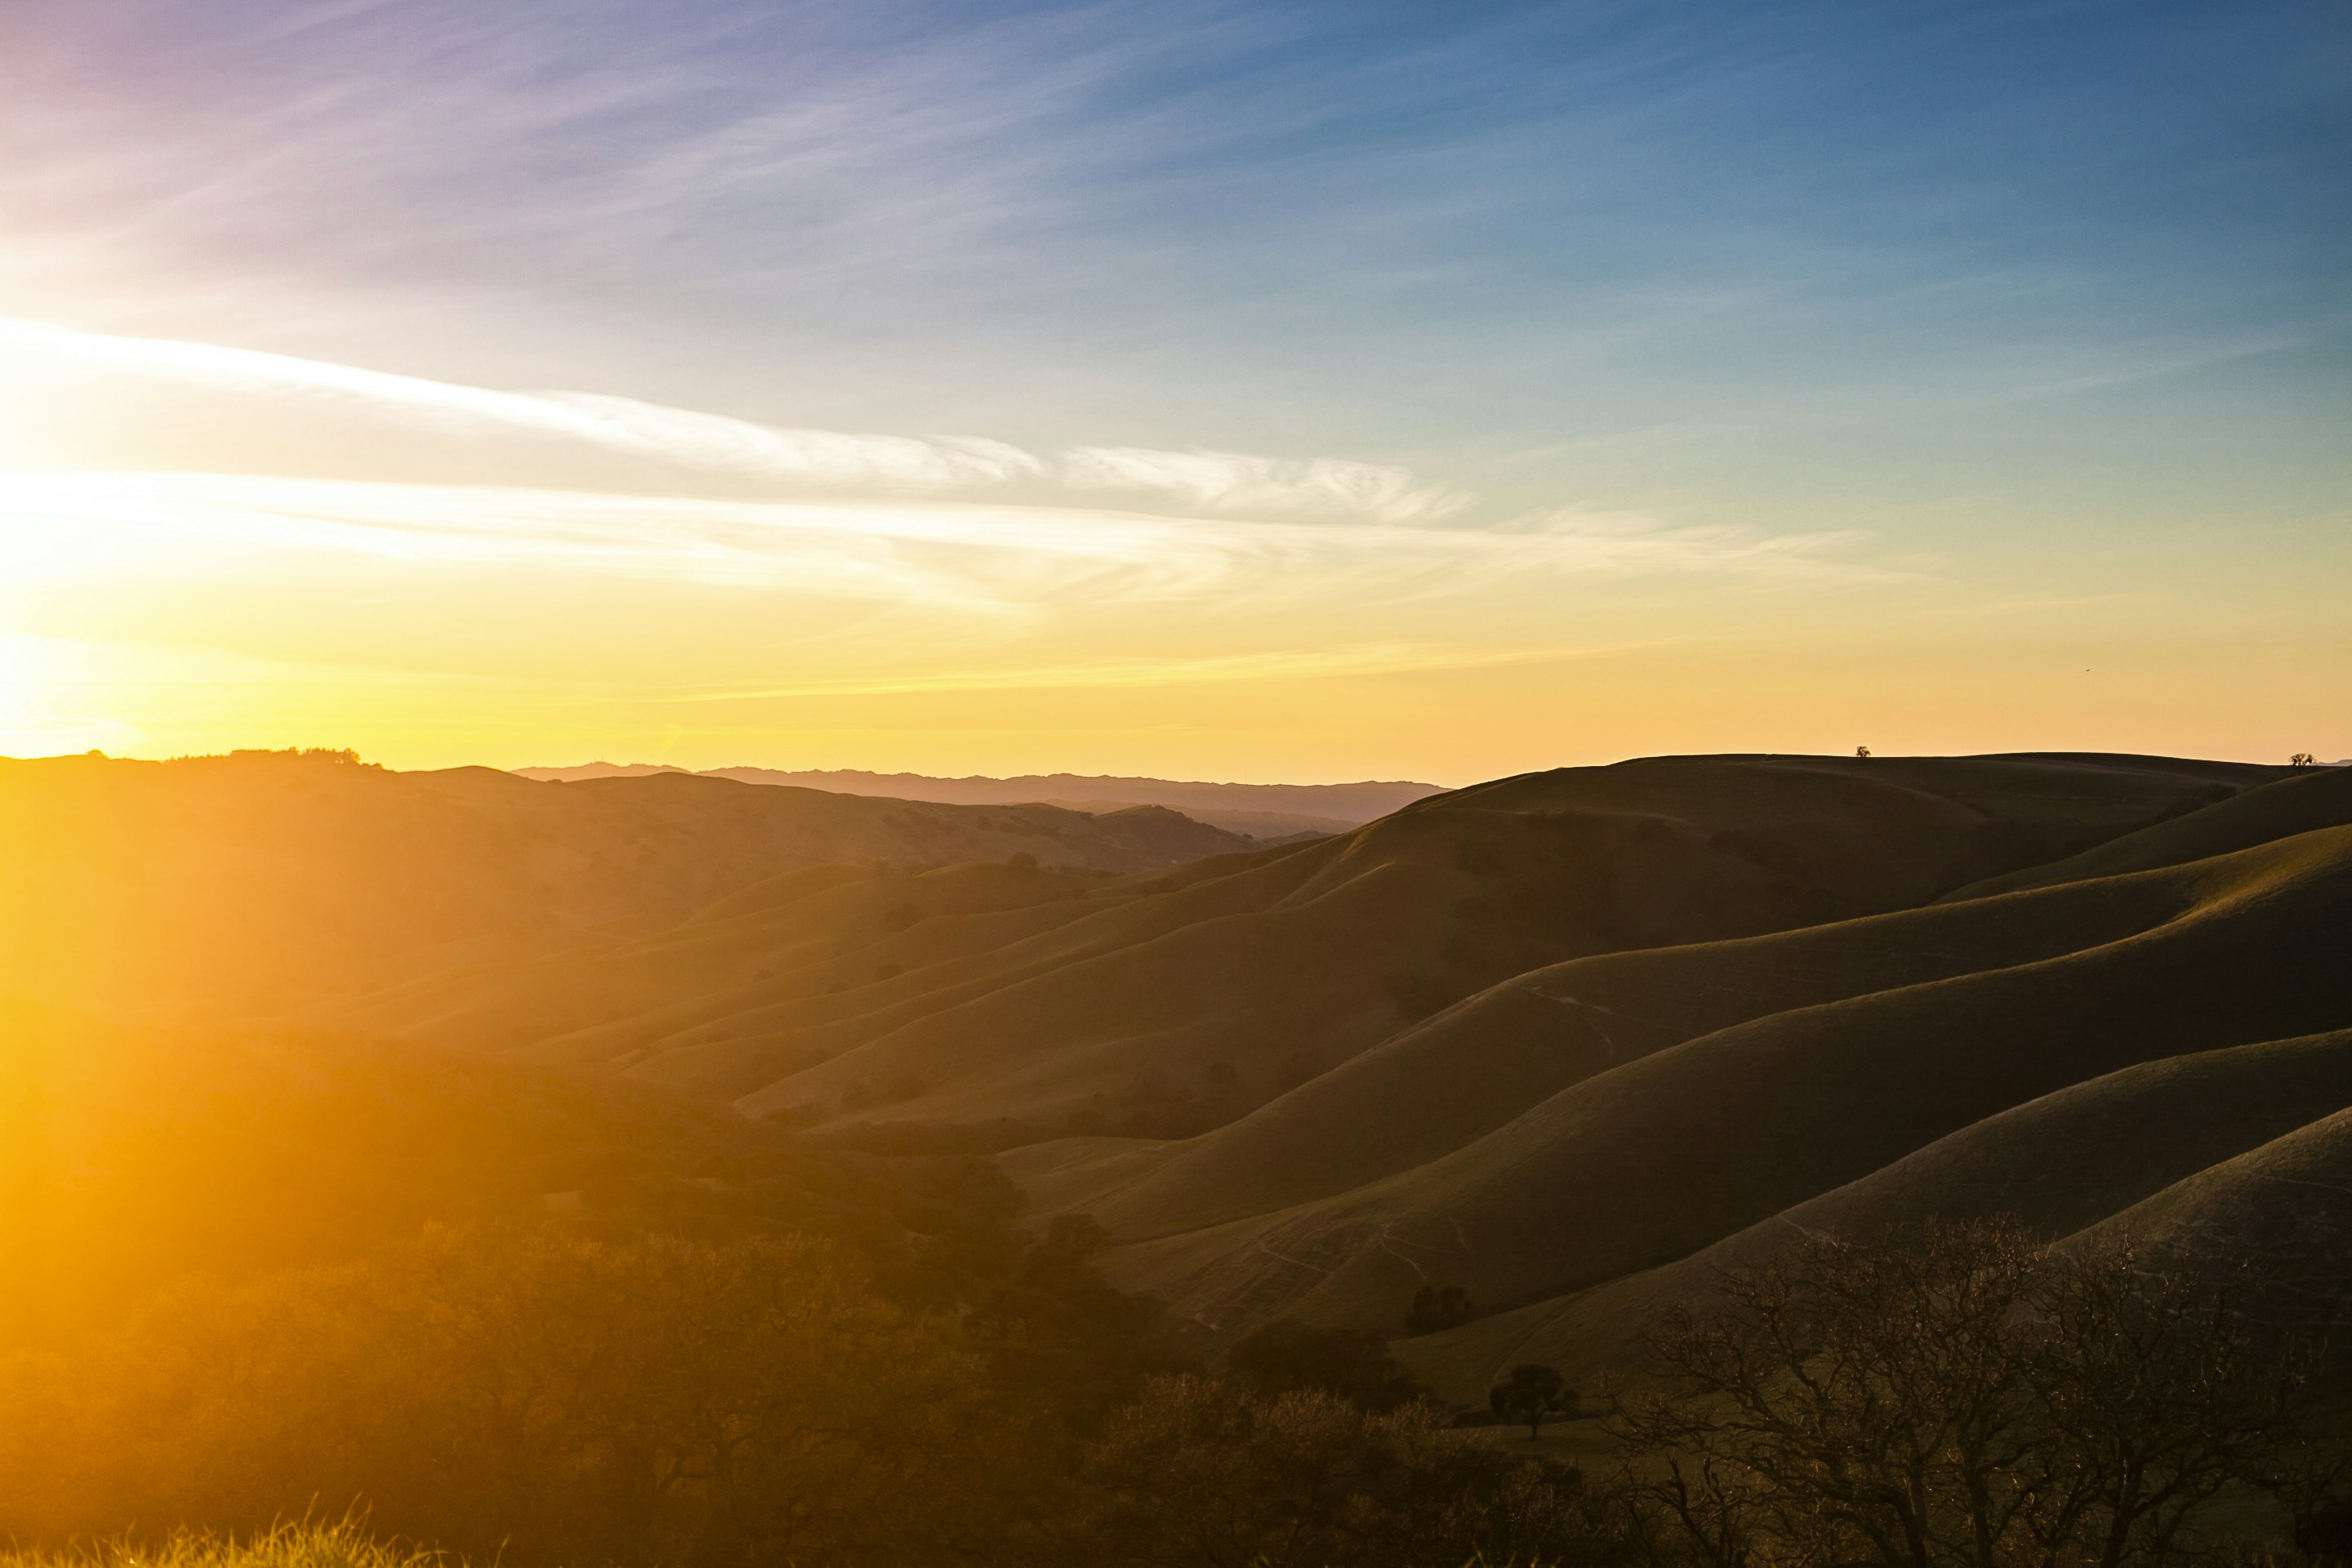 A view of the hills landscape at sunset from the top of Del Valle in Livermore, CA in the San Francisco Bay Area.